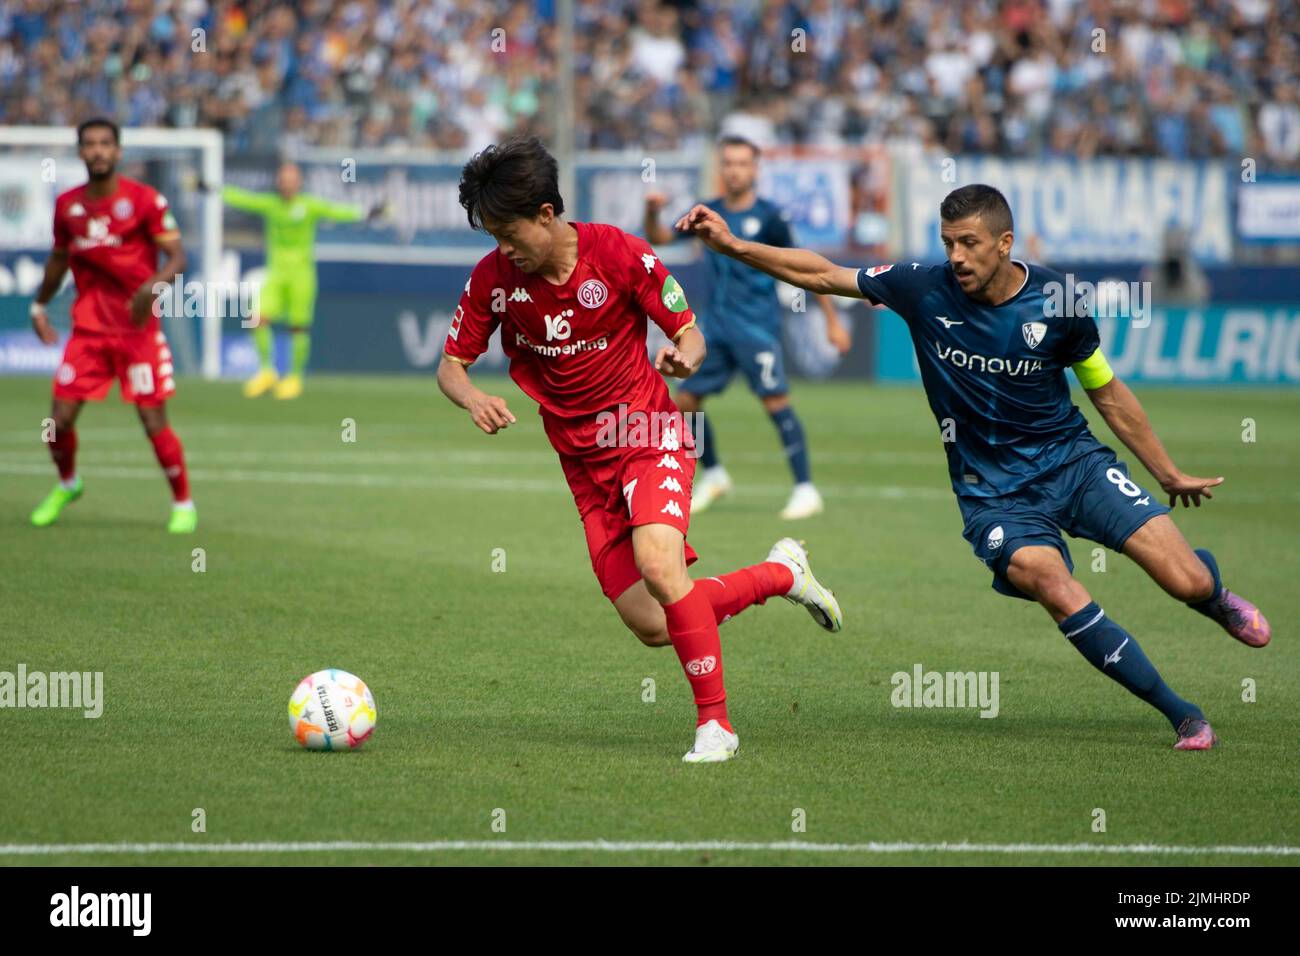 Jae-Sung LEE (MZ) versus Anthony LOSILLA (BO), action, duels, soccer 1st Bundesliga, 1st matchday, VfL Bochum (BO) - FSV FSV FSV Mainz 05 (MZ) 1: 2, on August 6th, 2022 in Bochum/Germany. #DFL regulations prohibit any use of photographs as image sequences and/or quasi-video # © Stock Photo